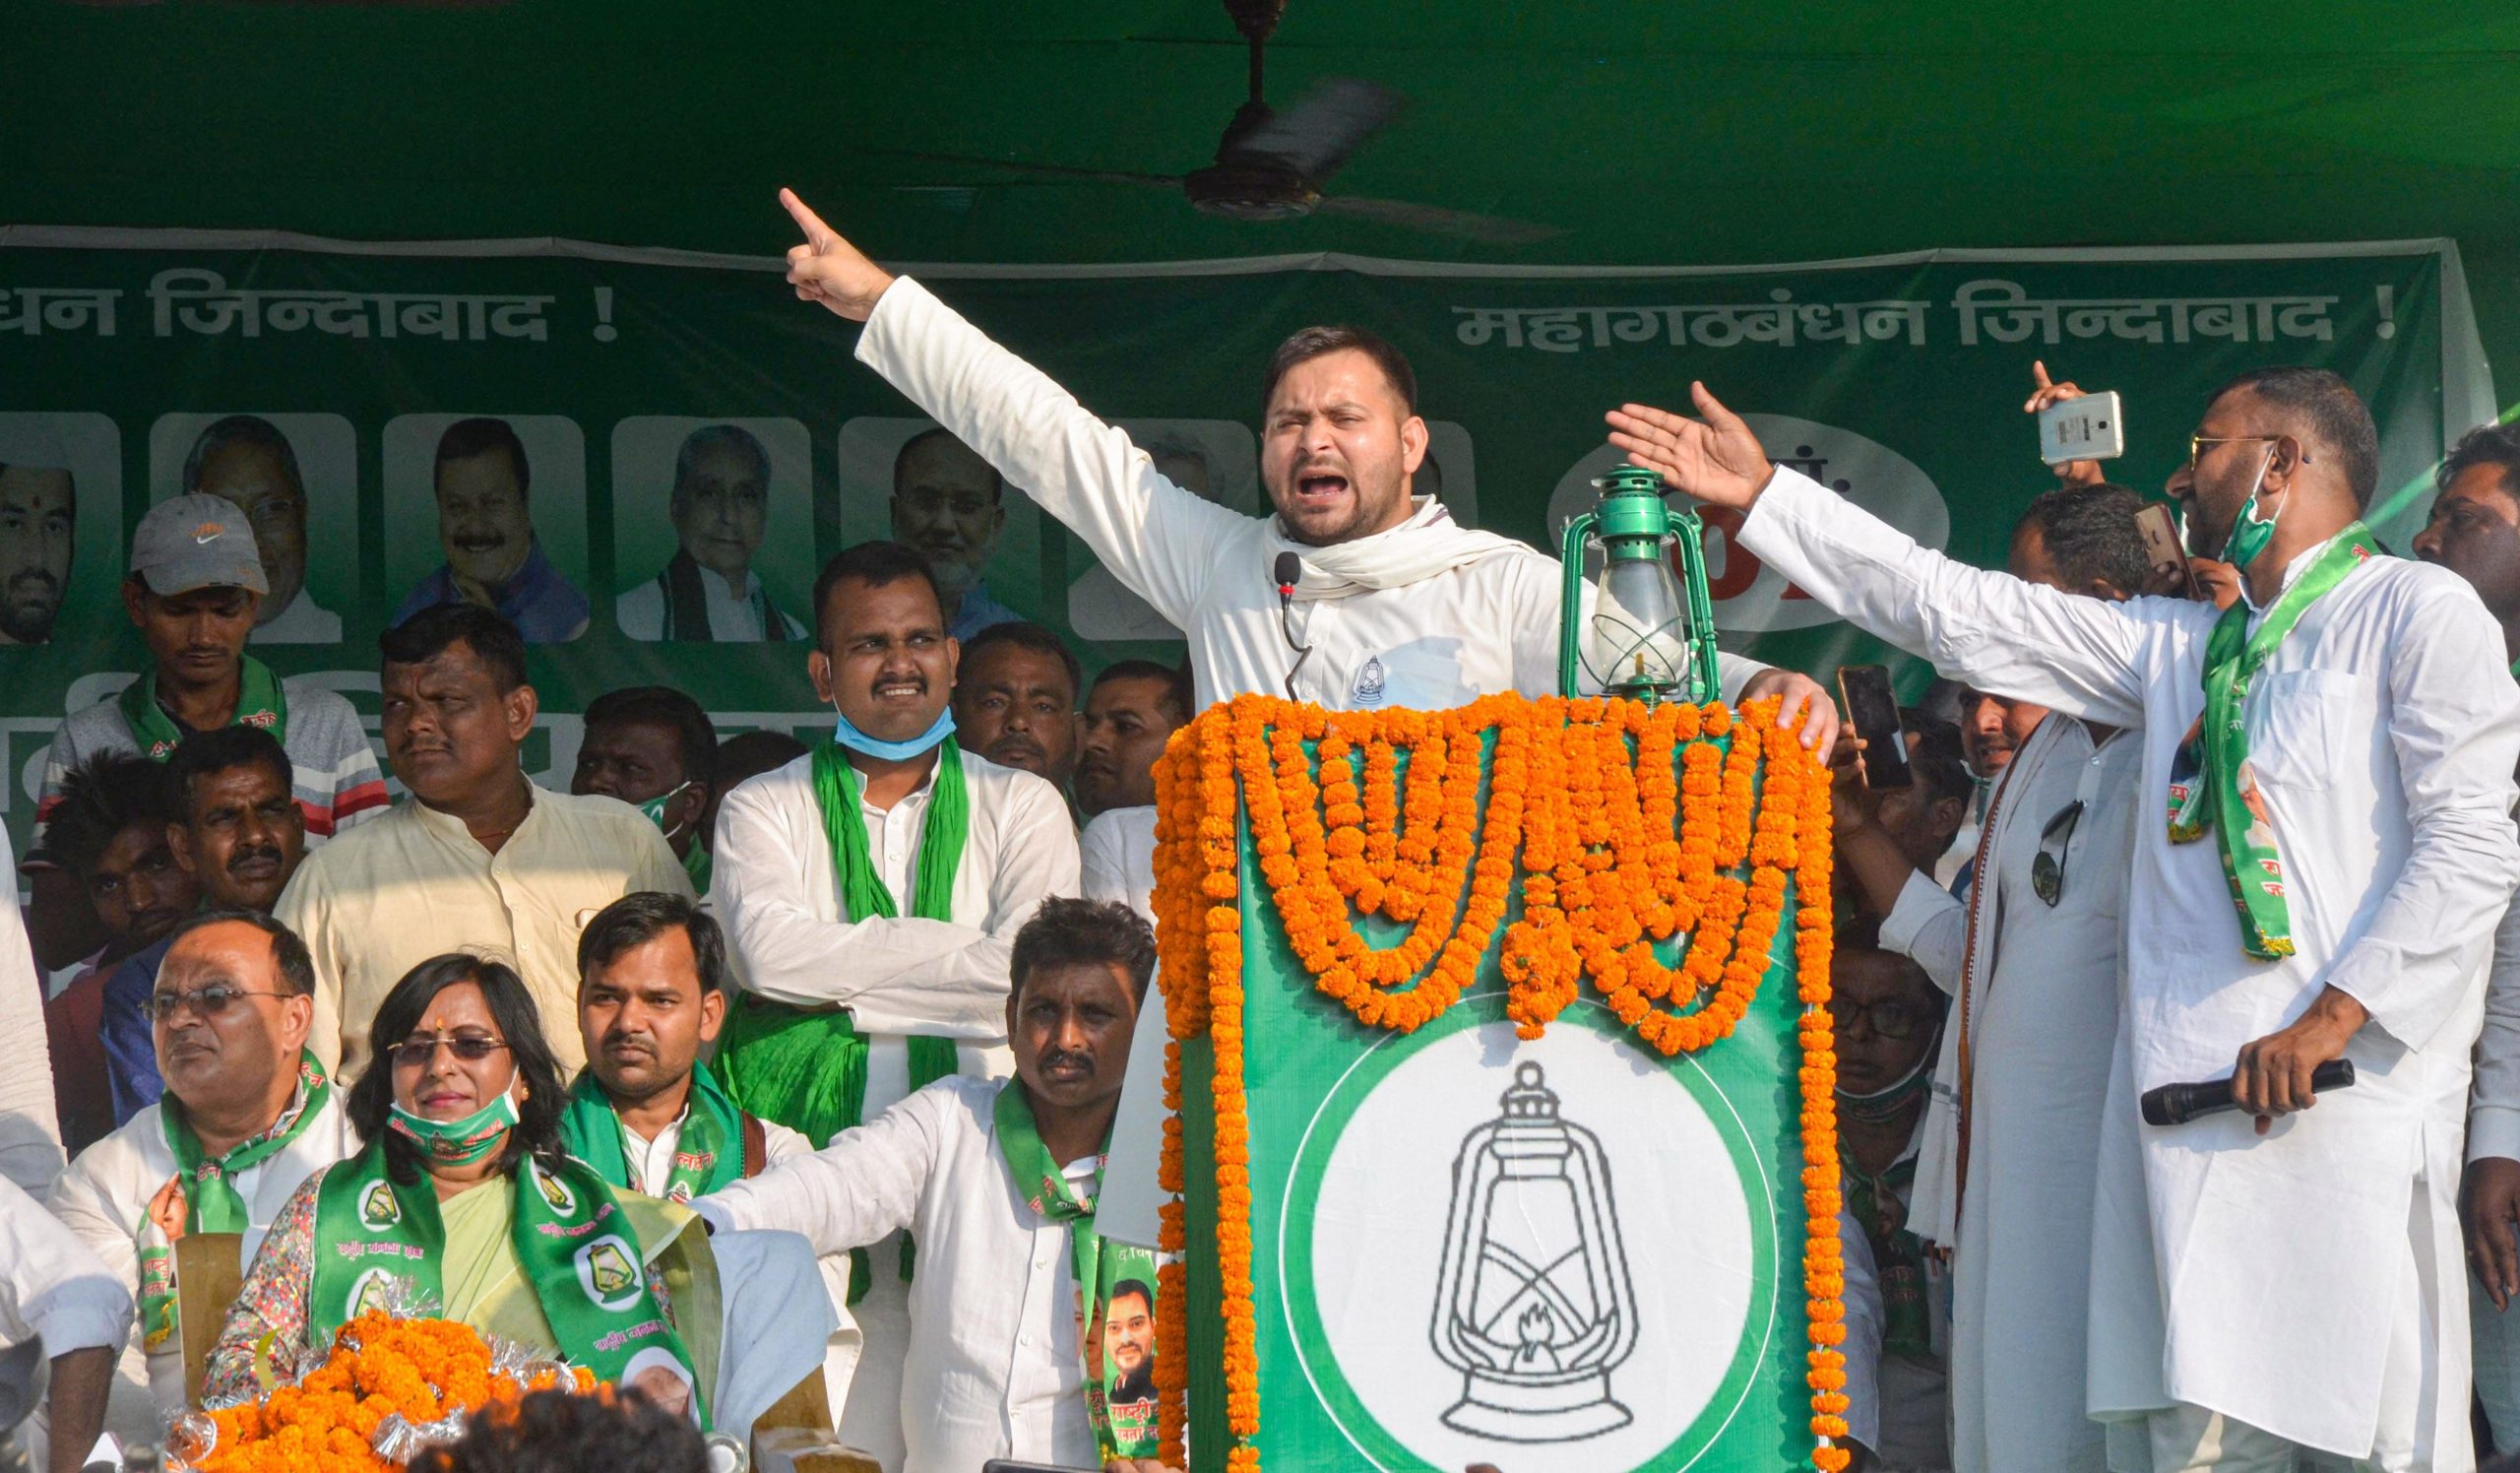 Watch | Pair of slippers hurled at RJD leader Tejashwi Yadav during a rally